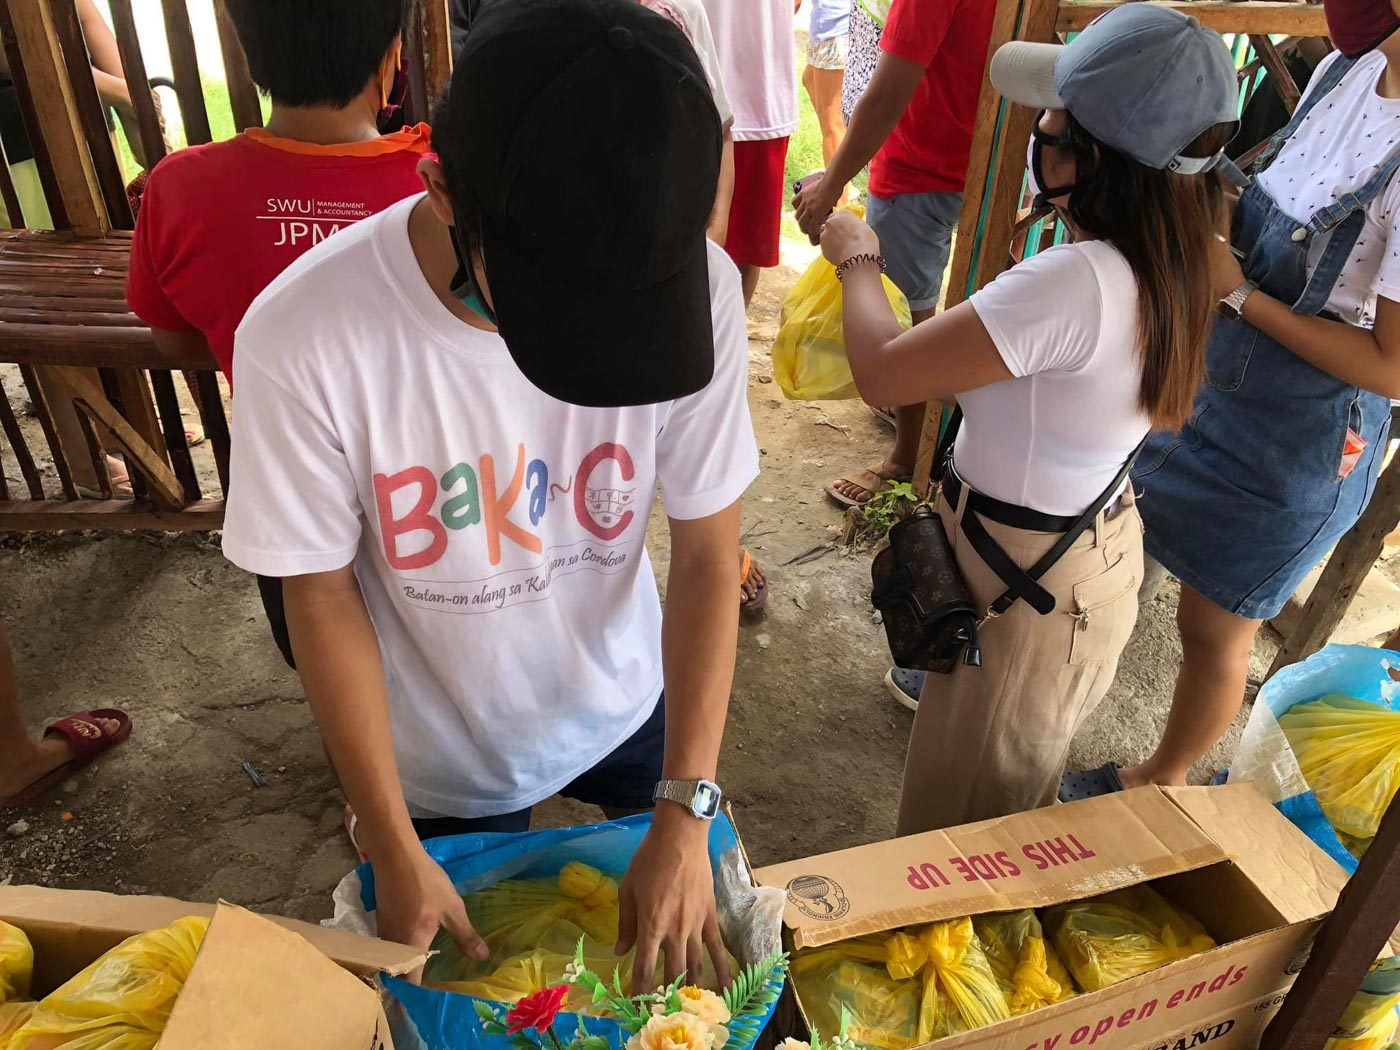 With relief goods running out, Cebuano youth group helps raise funds and aid